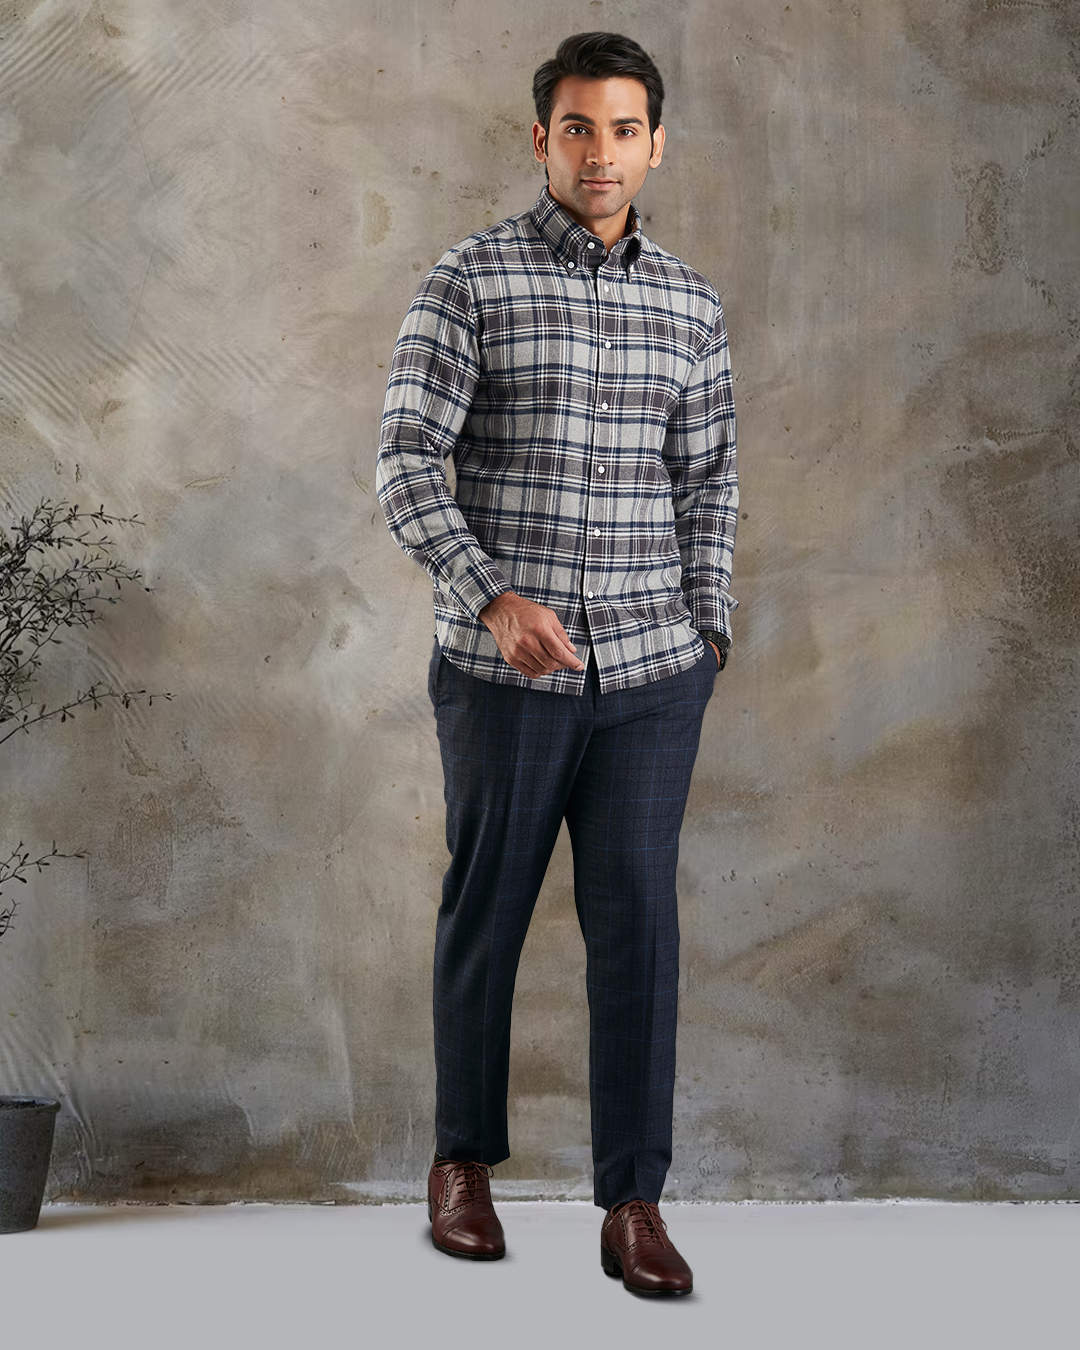 Model wearing custom check shirts for men by Luxire dark grey and navy hand in pocket